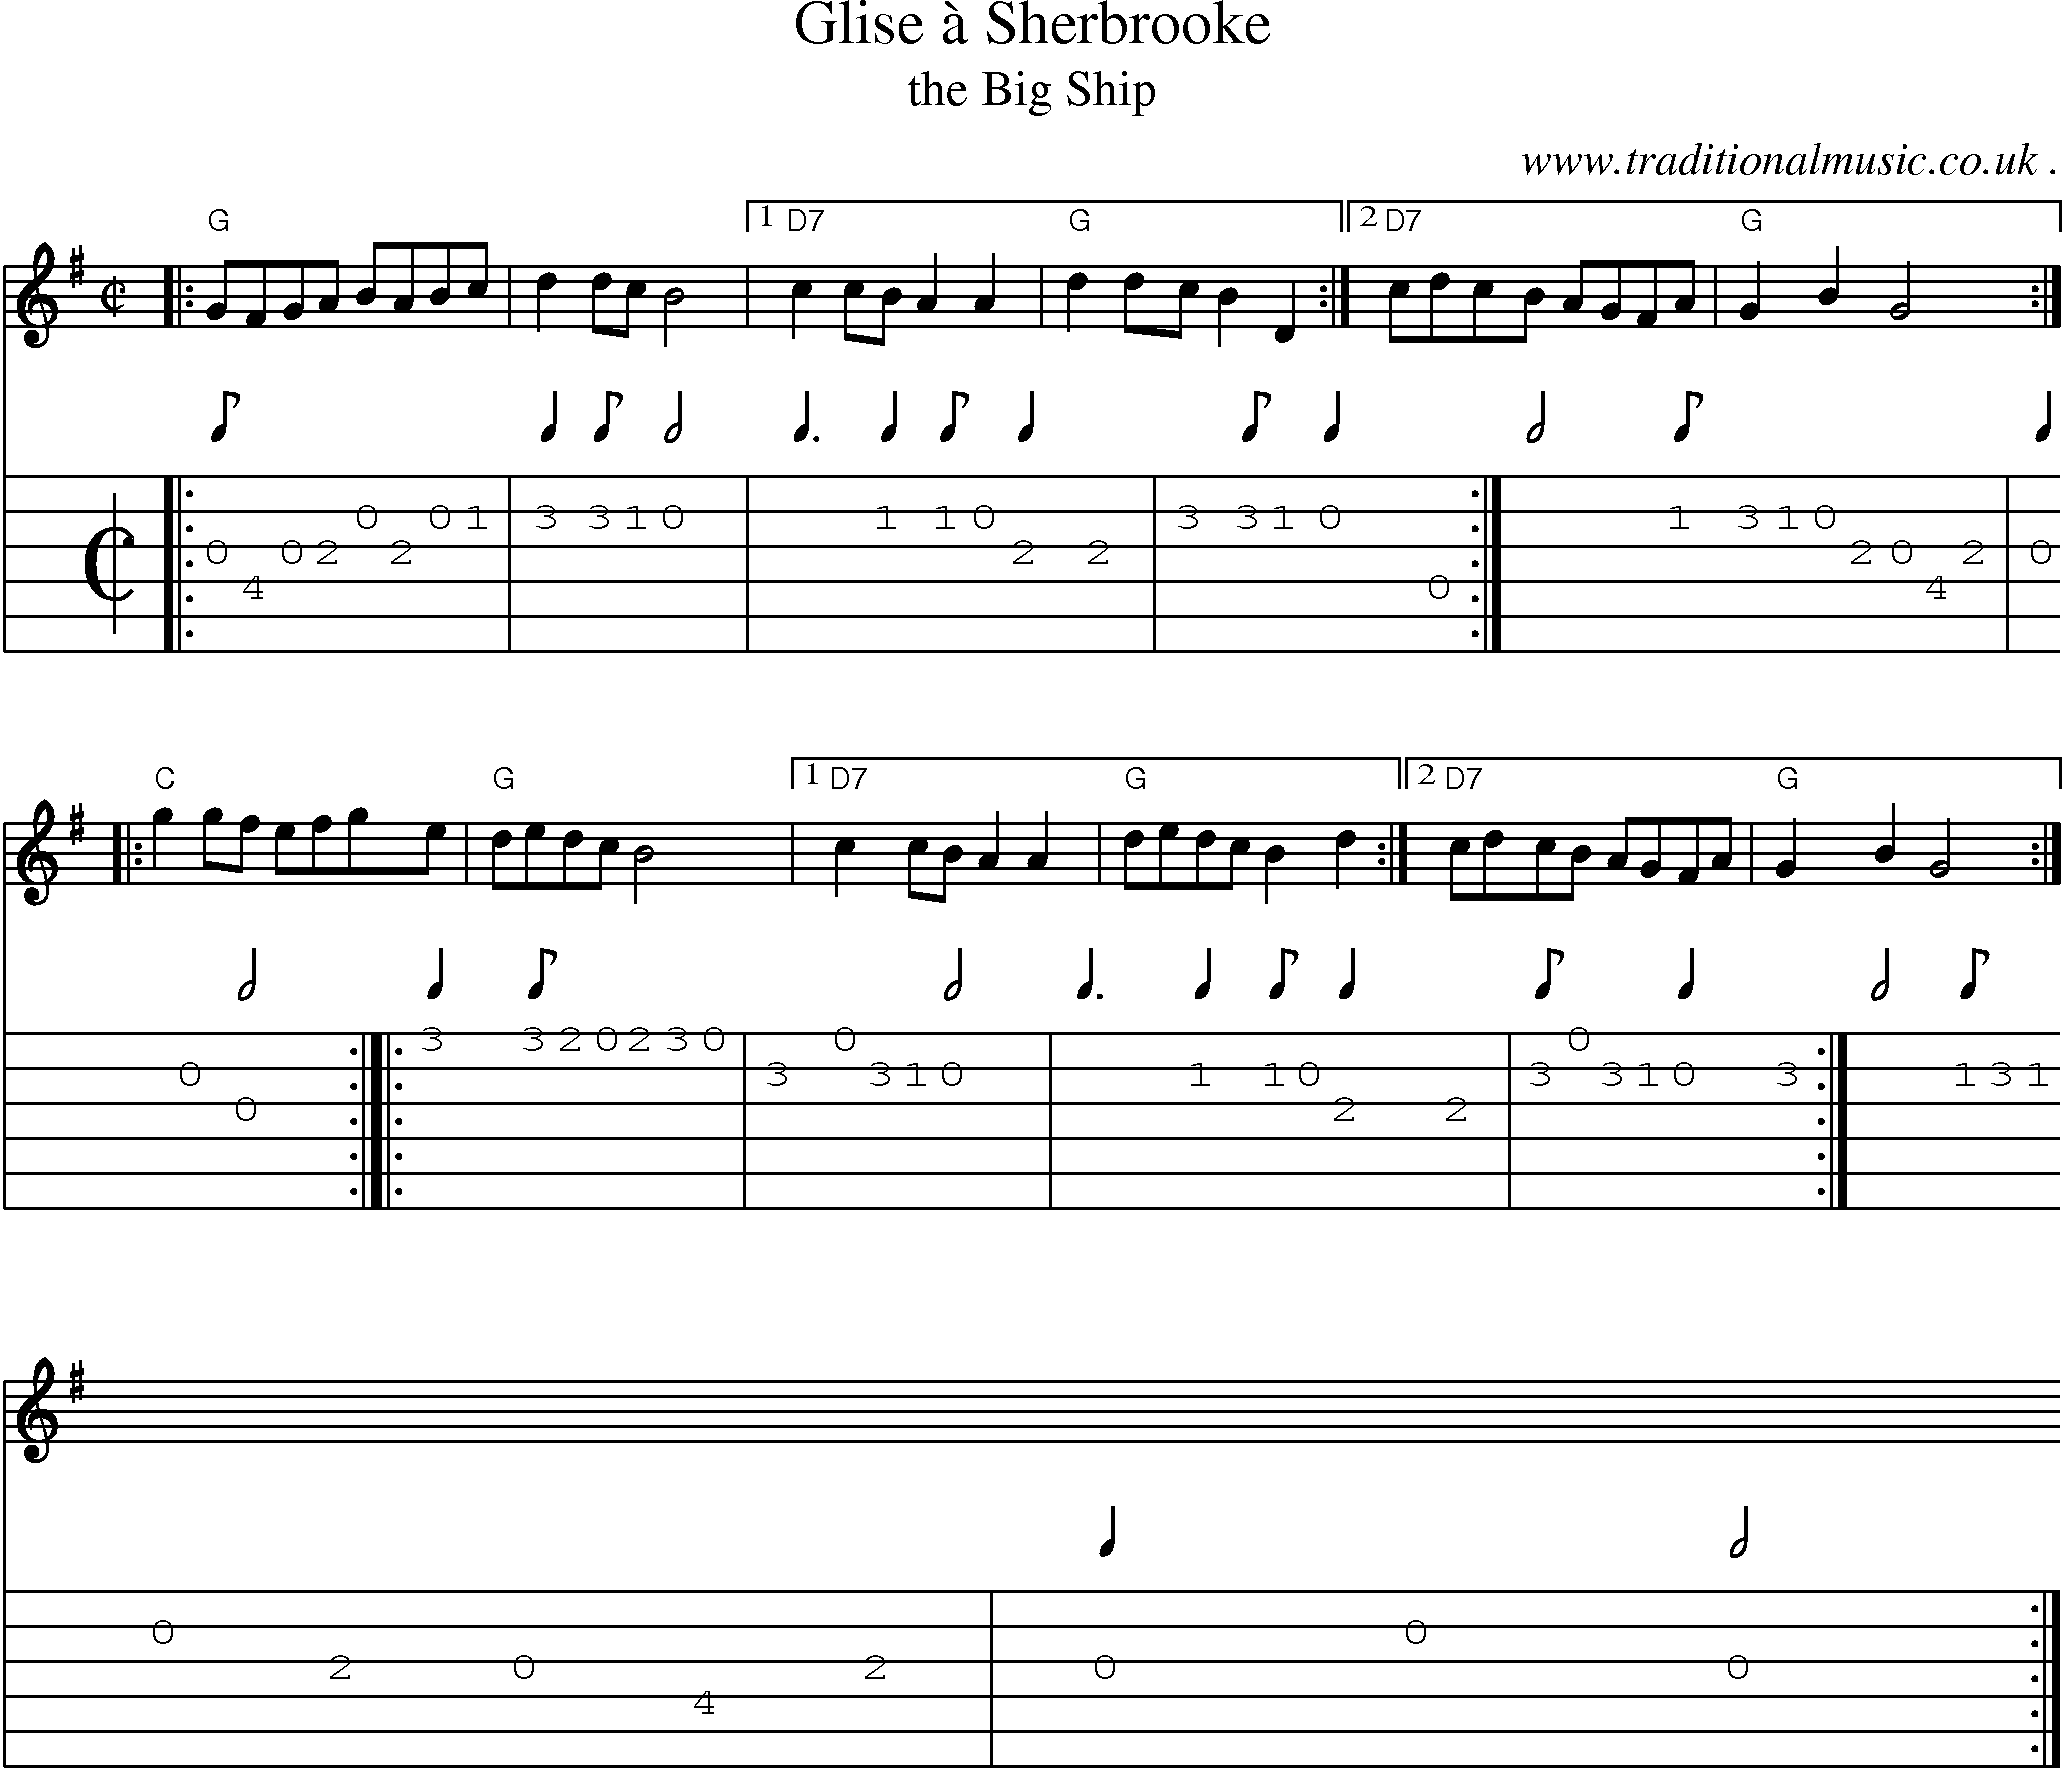 Sheet-music  score, Chords and Guitar Tabs for Glise A Sherbrooke